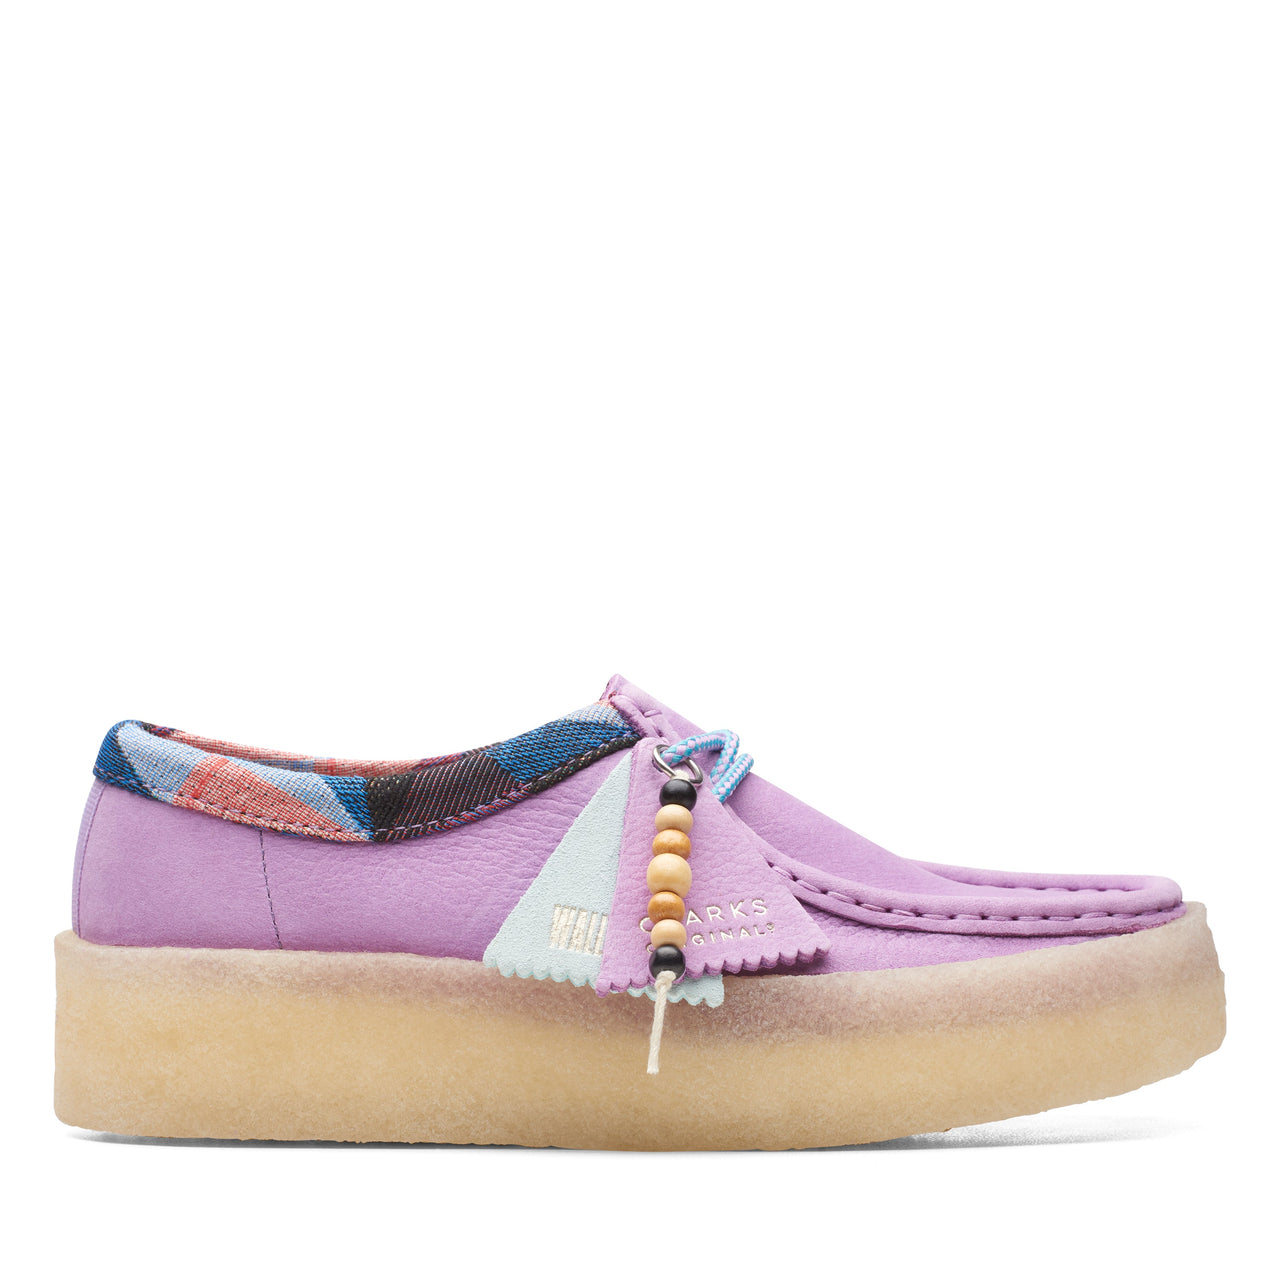 Pair of light purple Clarks Women Wallabee Cup Shoes on white background